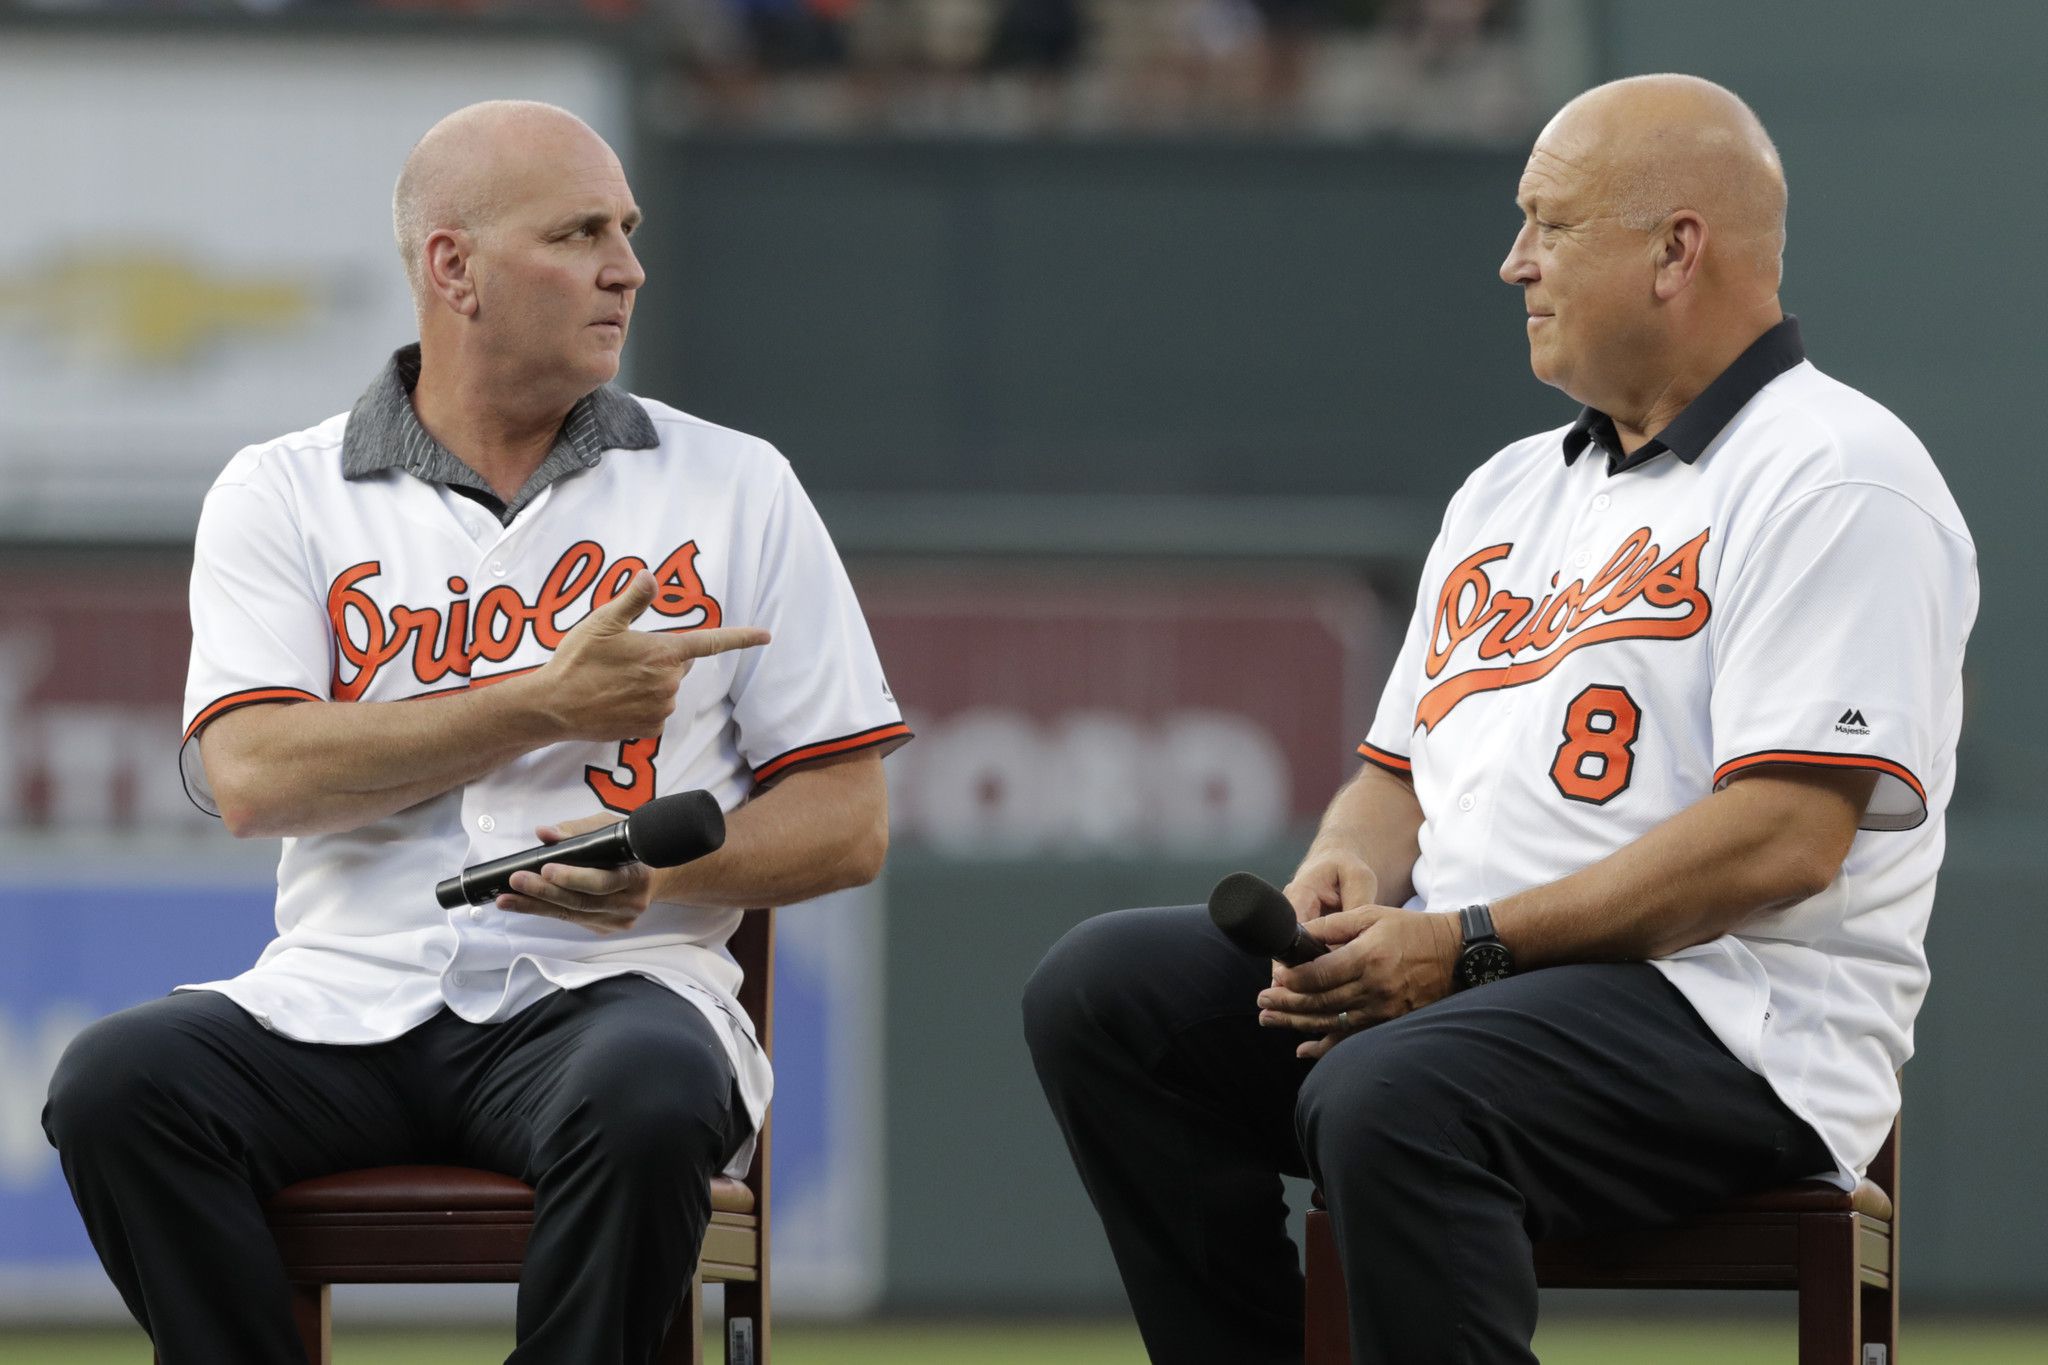 Cal Ripken Sr. foundation helps to feed hungry